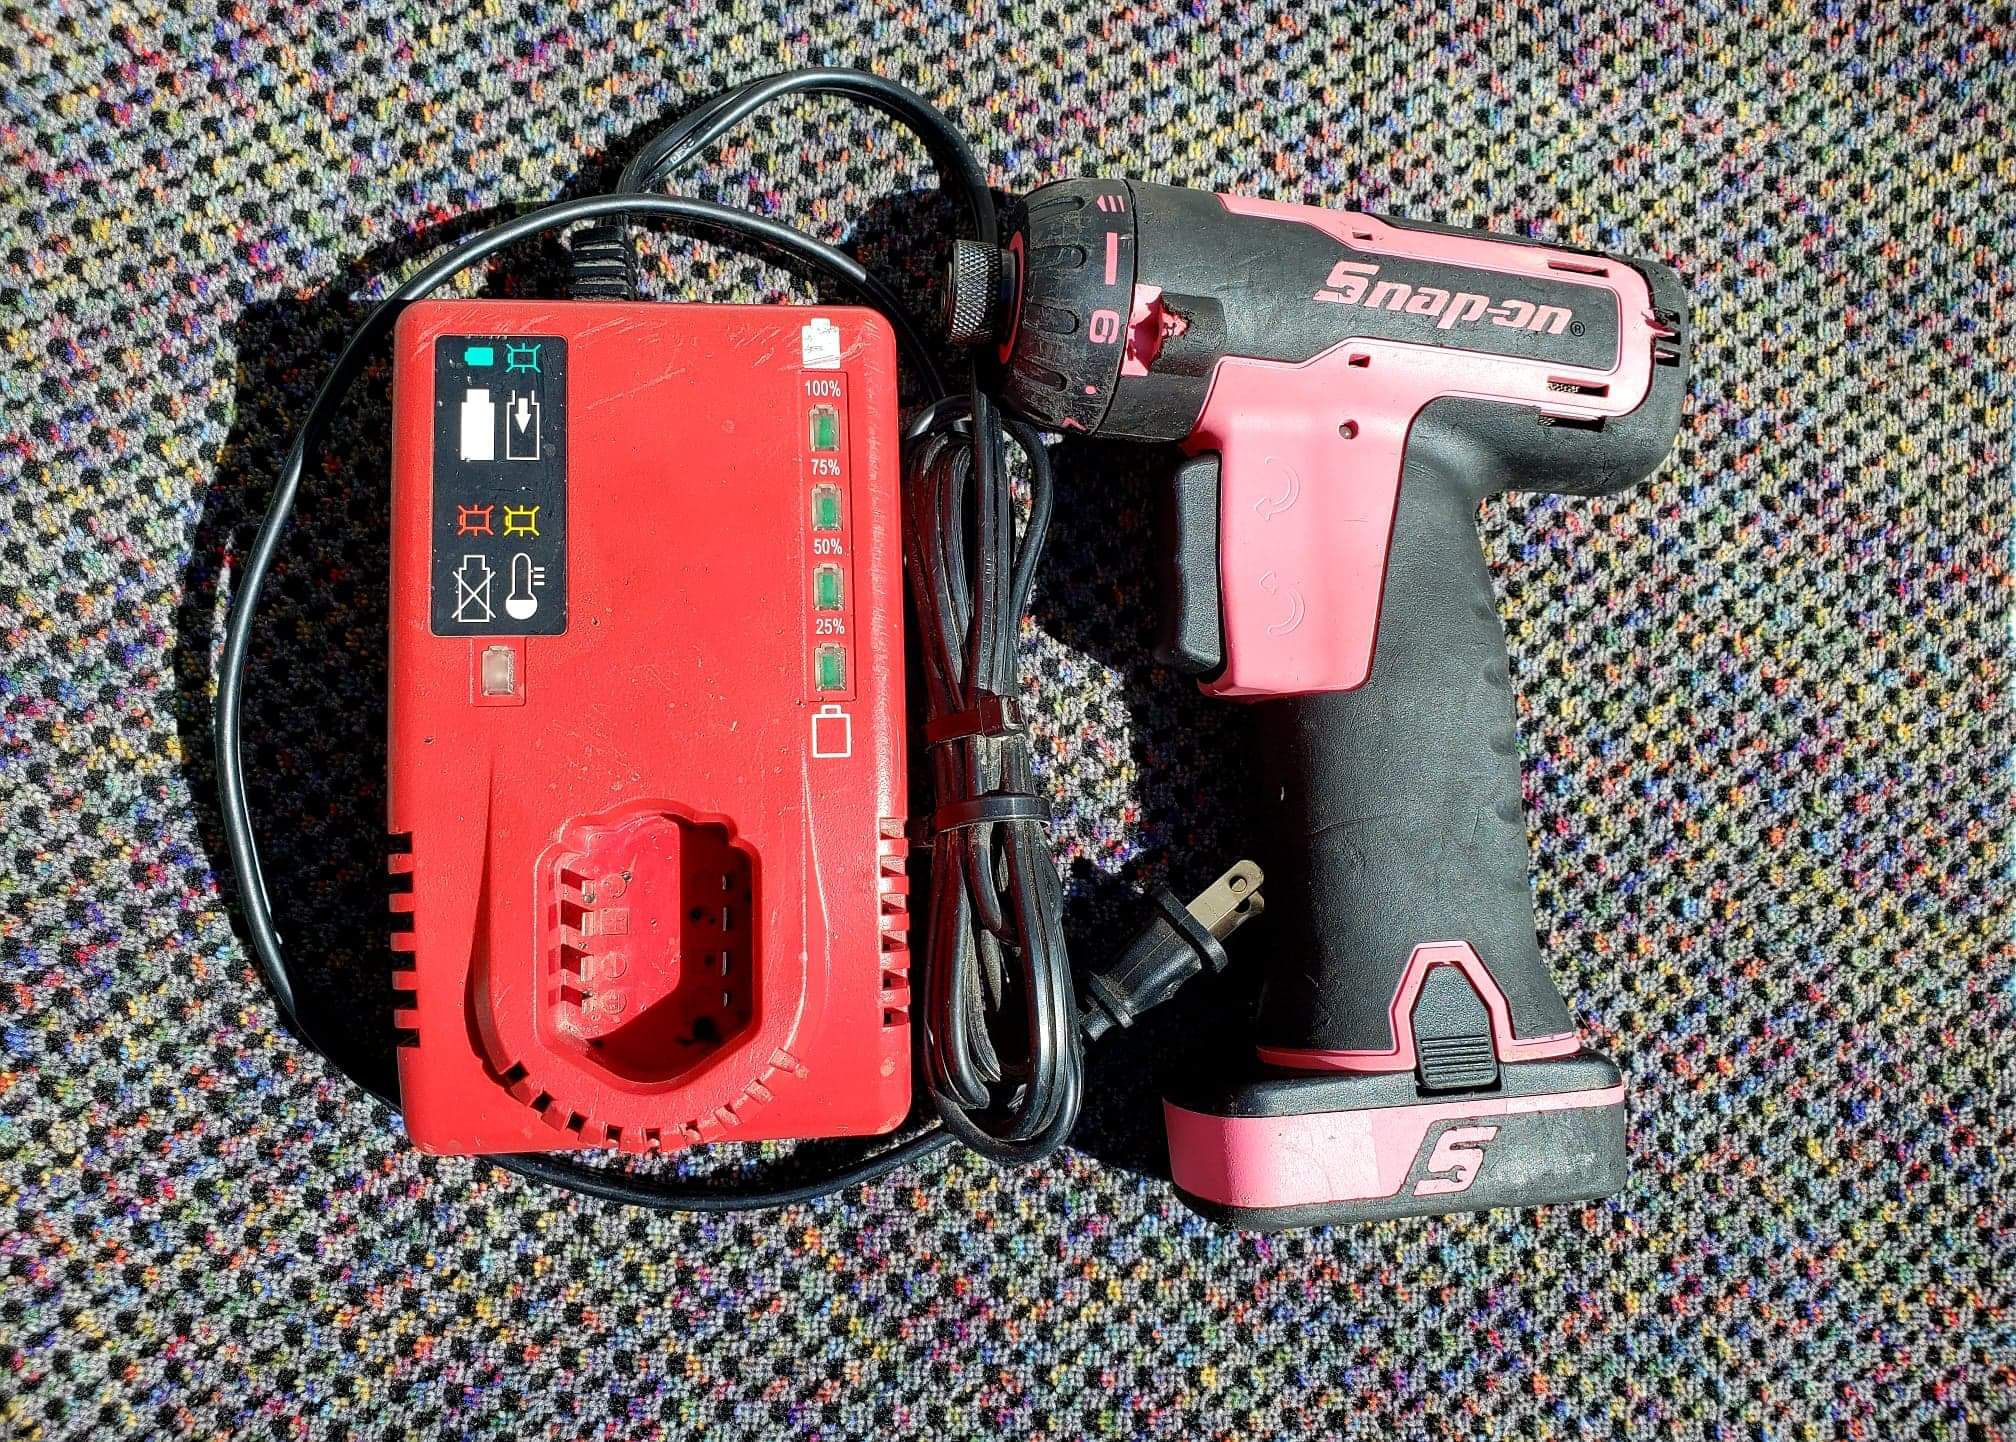 Snap-on Tools Pink Cordless Screwdriver Kit CTS761P ask $169